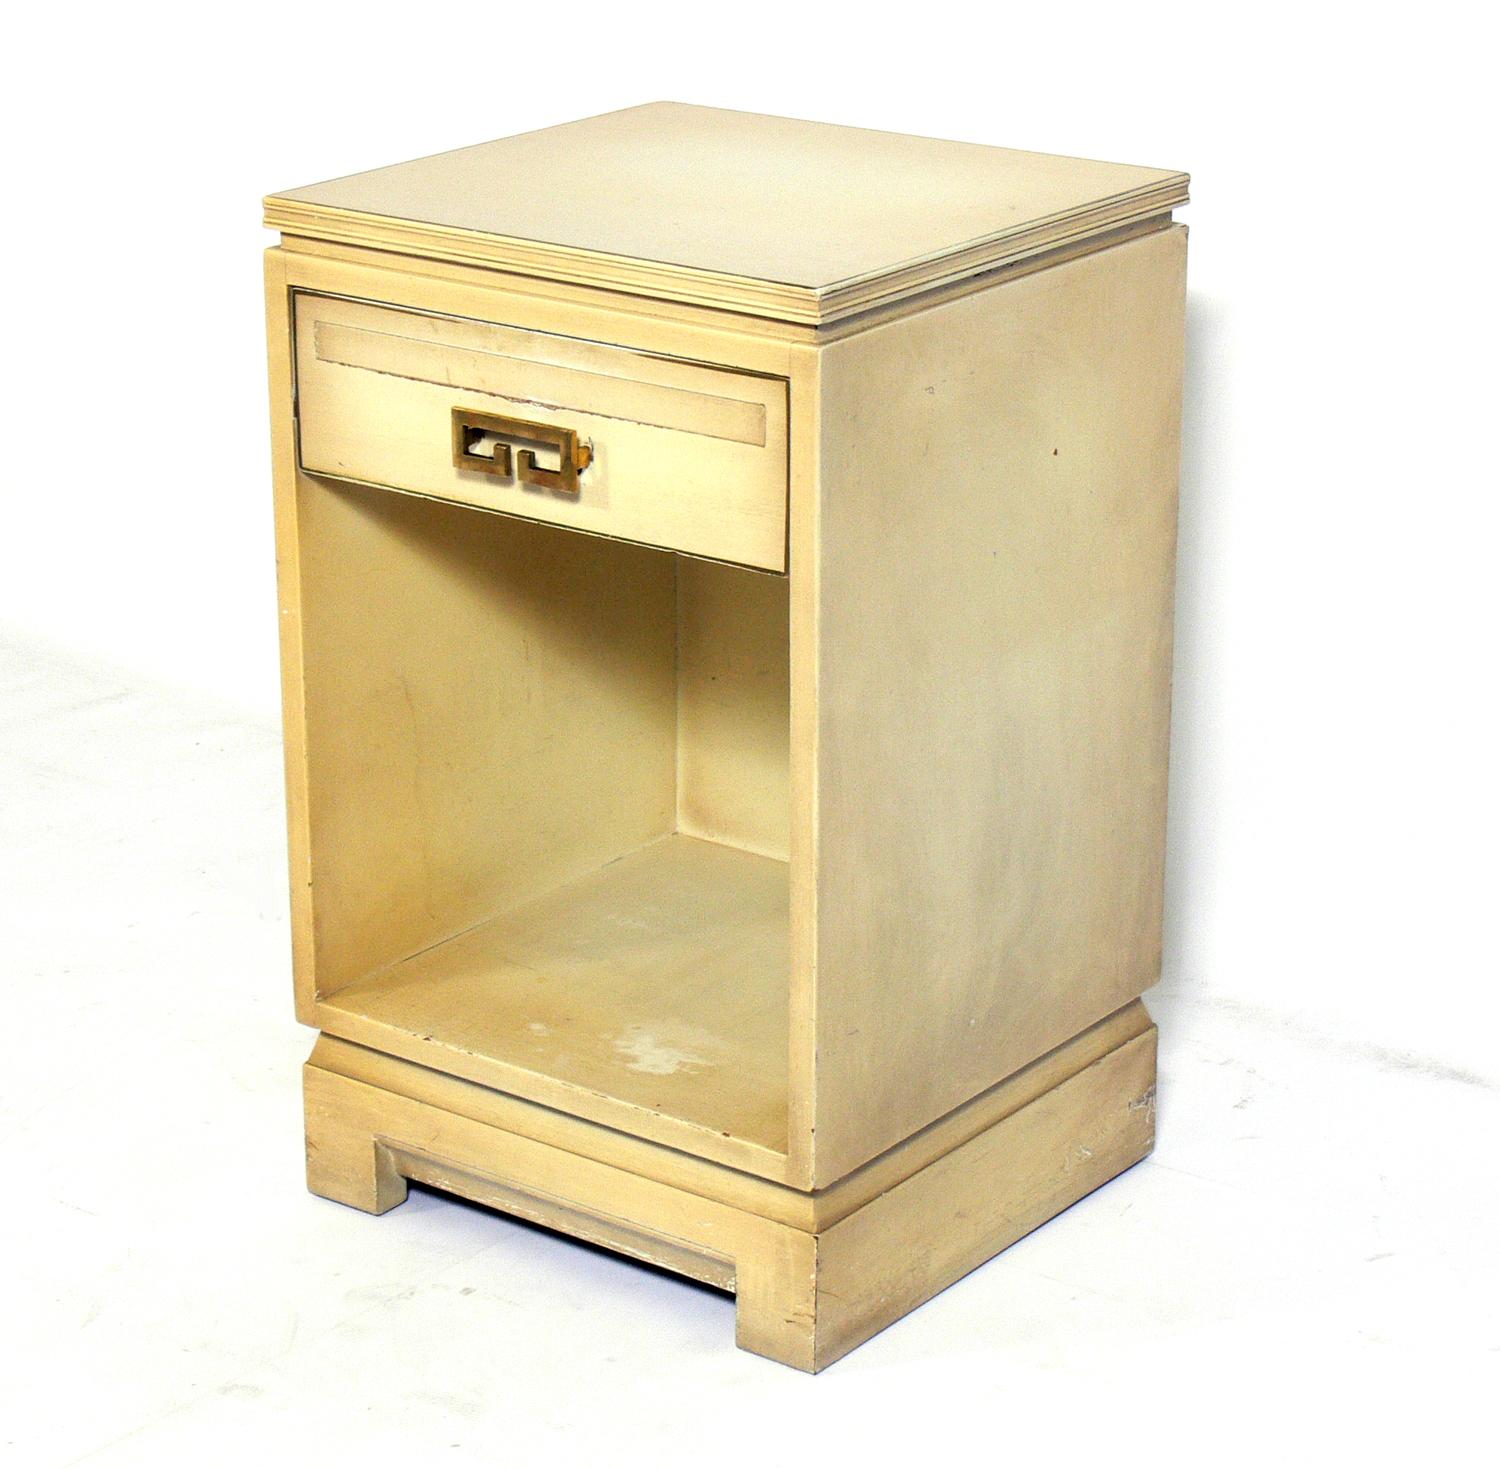 Pair of Chinoiserie or Asian style nightstands, for the retailer John Stuart of NYC, American, circa 1950s. These nightstands are currently being refinished and can be completed in your choice of color. Whether you prefer wood stain or a solid color